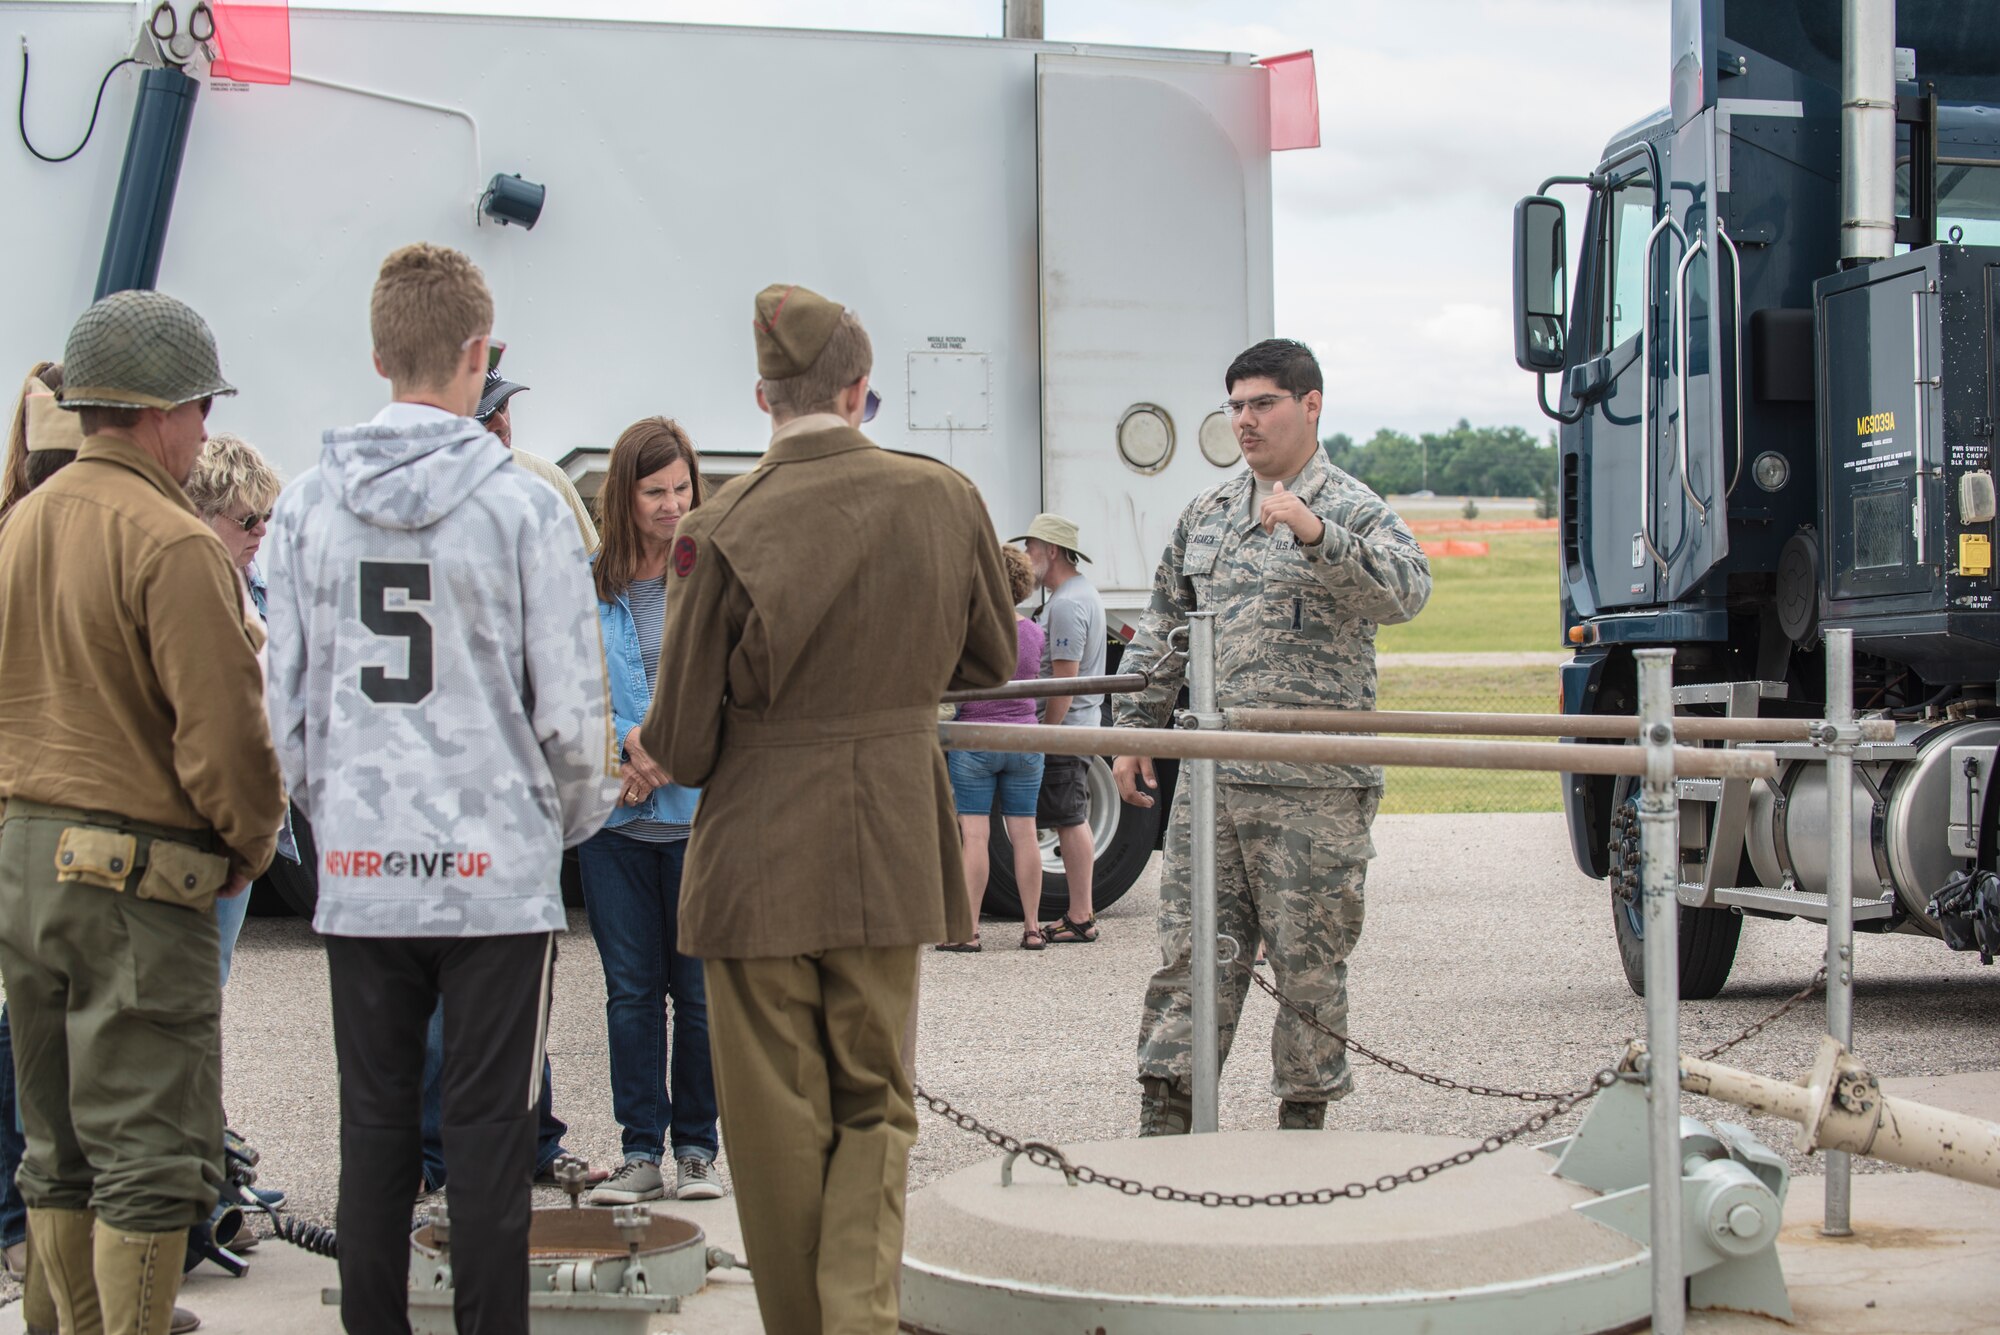 Senior Airman Cedric Delagarza, 90th Missile Maintenance Squadron missile handling team technician, shows a military vehicle to members of the local community during a tour of Uniform-01, a Minuteman III ICBM launch facility trainer at F.E. Warren Air Force Base, Wyo., July 20, 2019. These tours allow the community an opportunity to see how a launch facility operates. Fort D.A. Russell Days provides the public an opportunity to celebrate and learn about the base’s rich history. (U.S. Air Force photo by Senior Airman Abbigayle Williams)